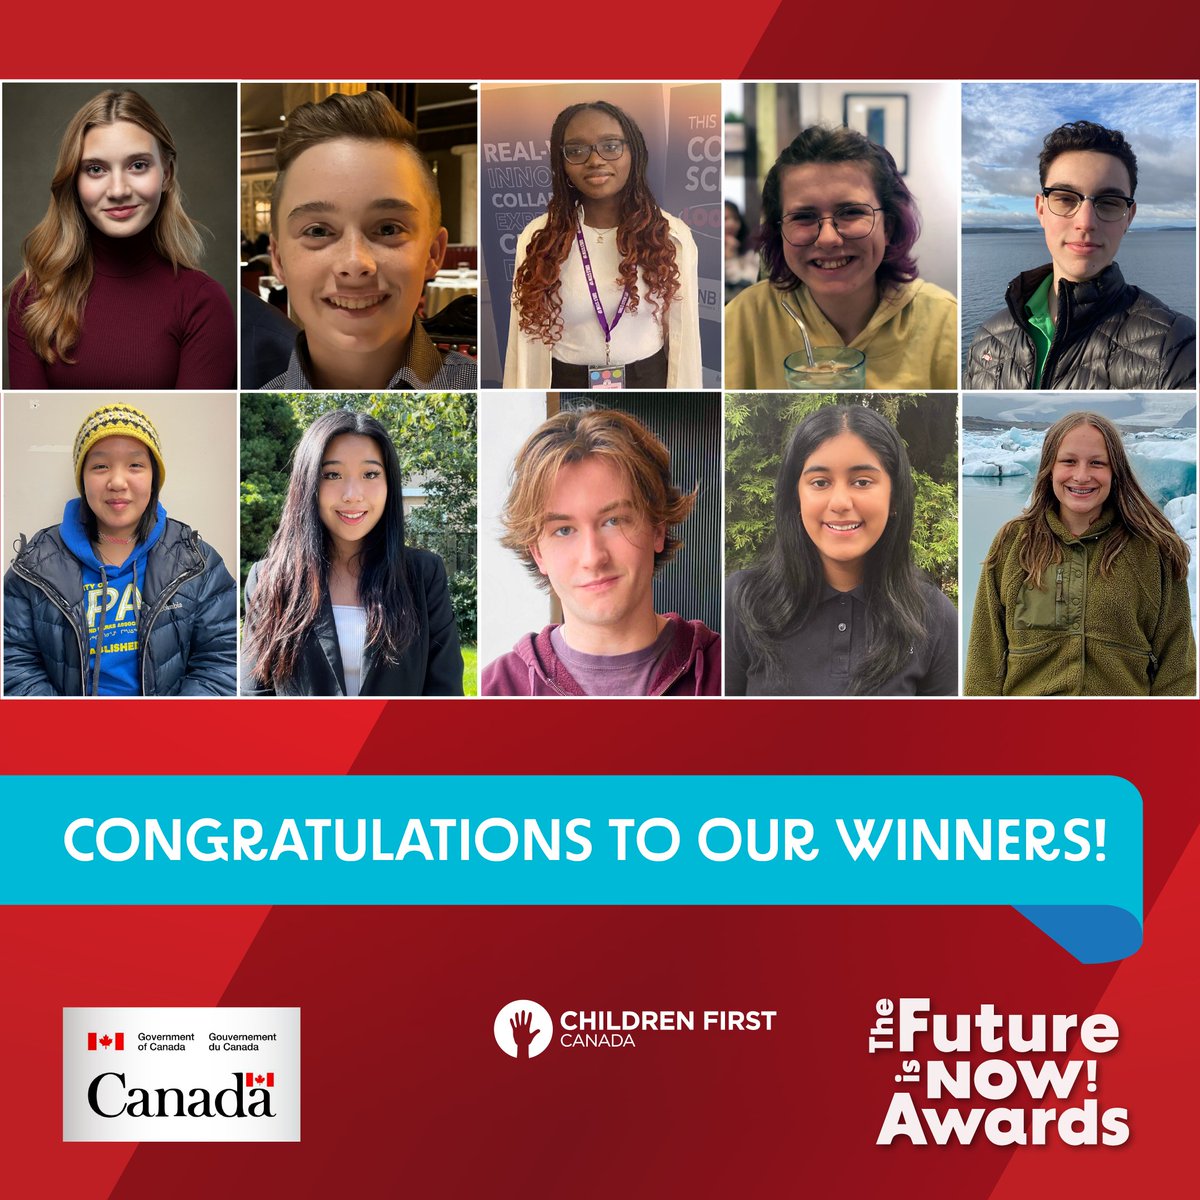 Drum roll please! 🥁

Introducing the inaugural winners of the Future is NOW! Awards: 10 incredible young leaders and changemakers who are defending the right of children and working to make 🇨🇦 the best place in the 🌍 for kids to grow up! 

#thefutureisnow #futureisnowawards